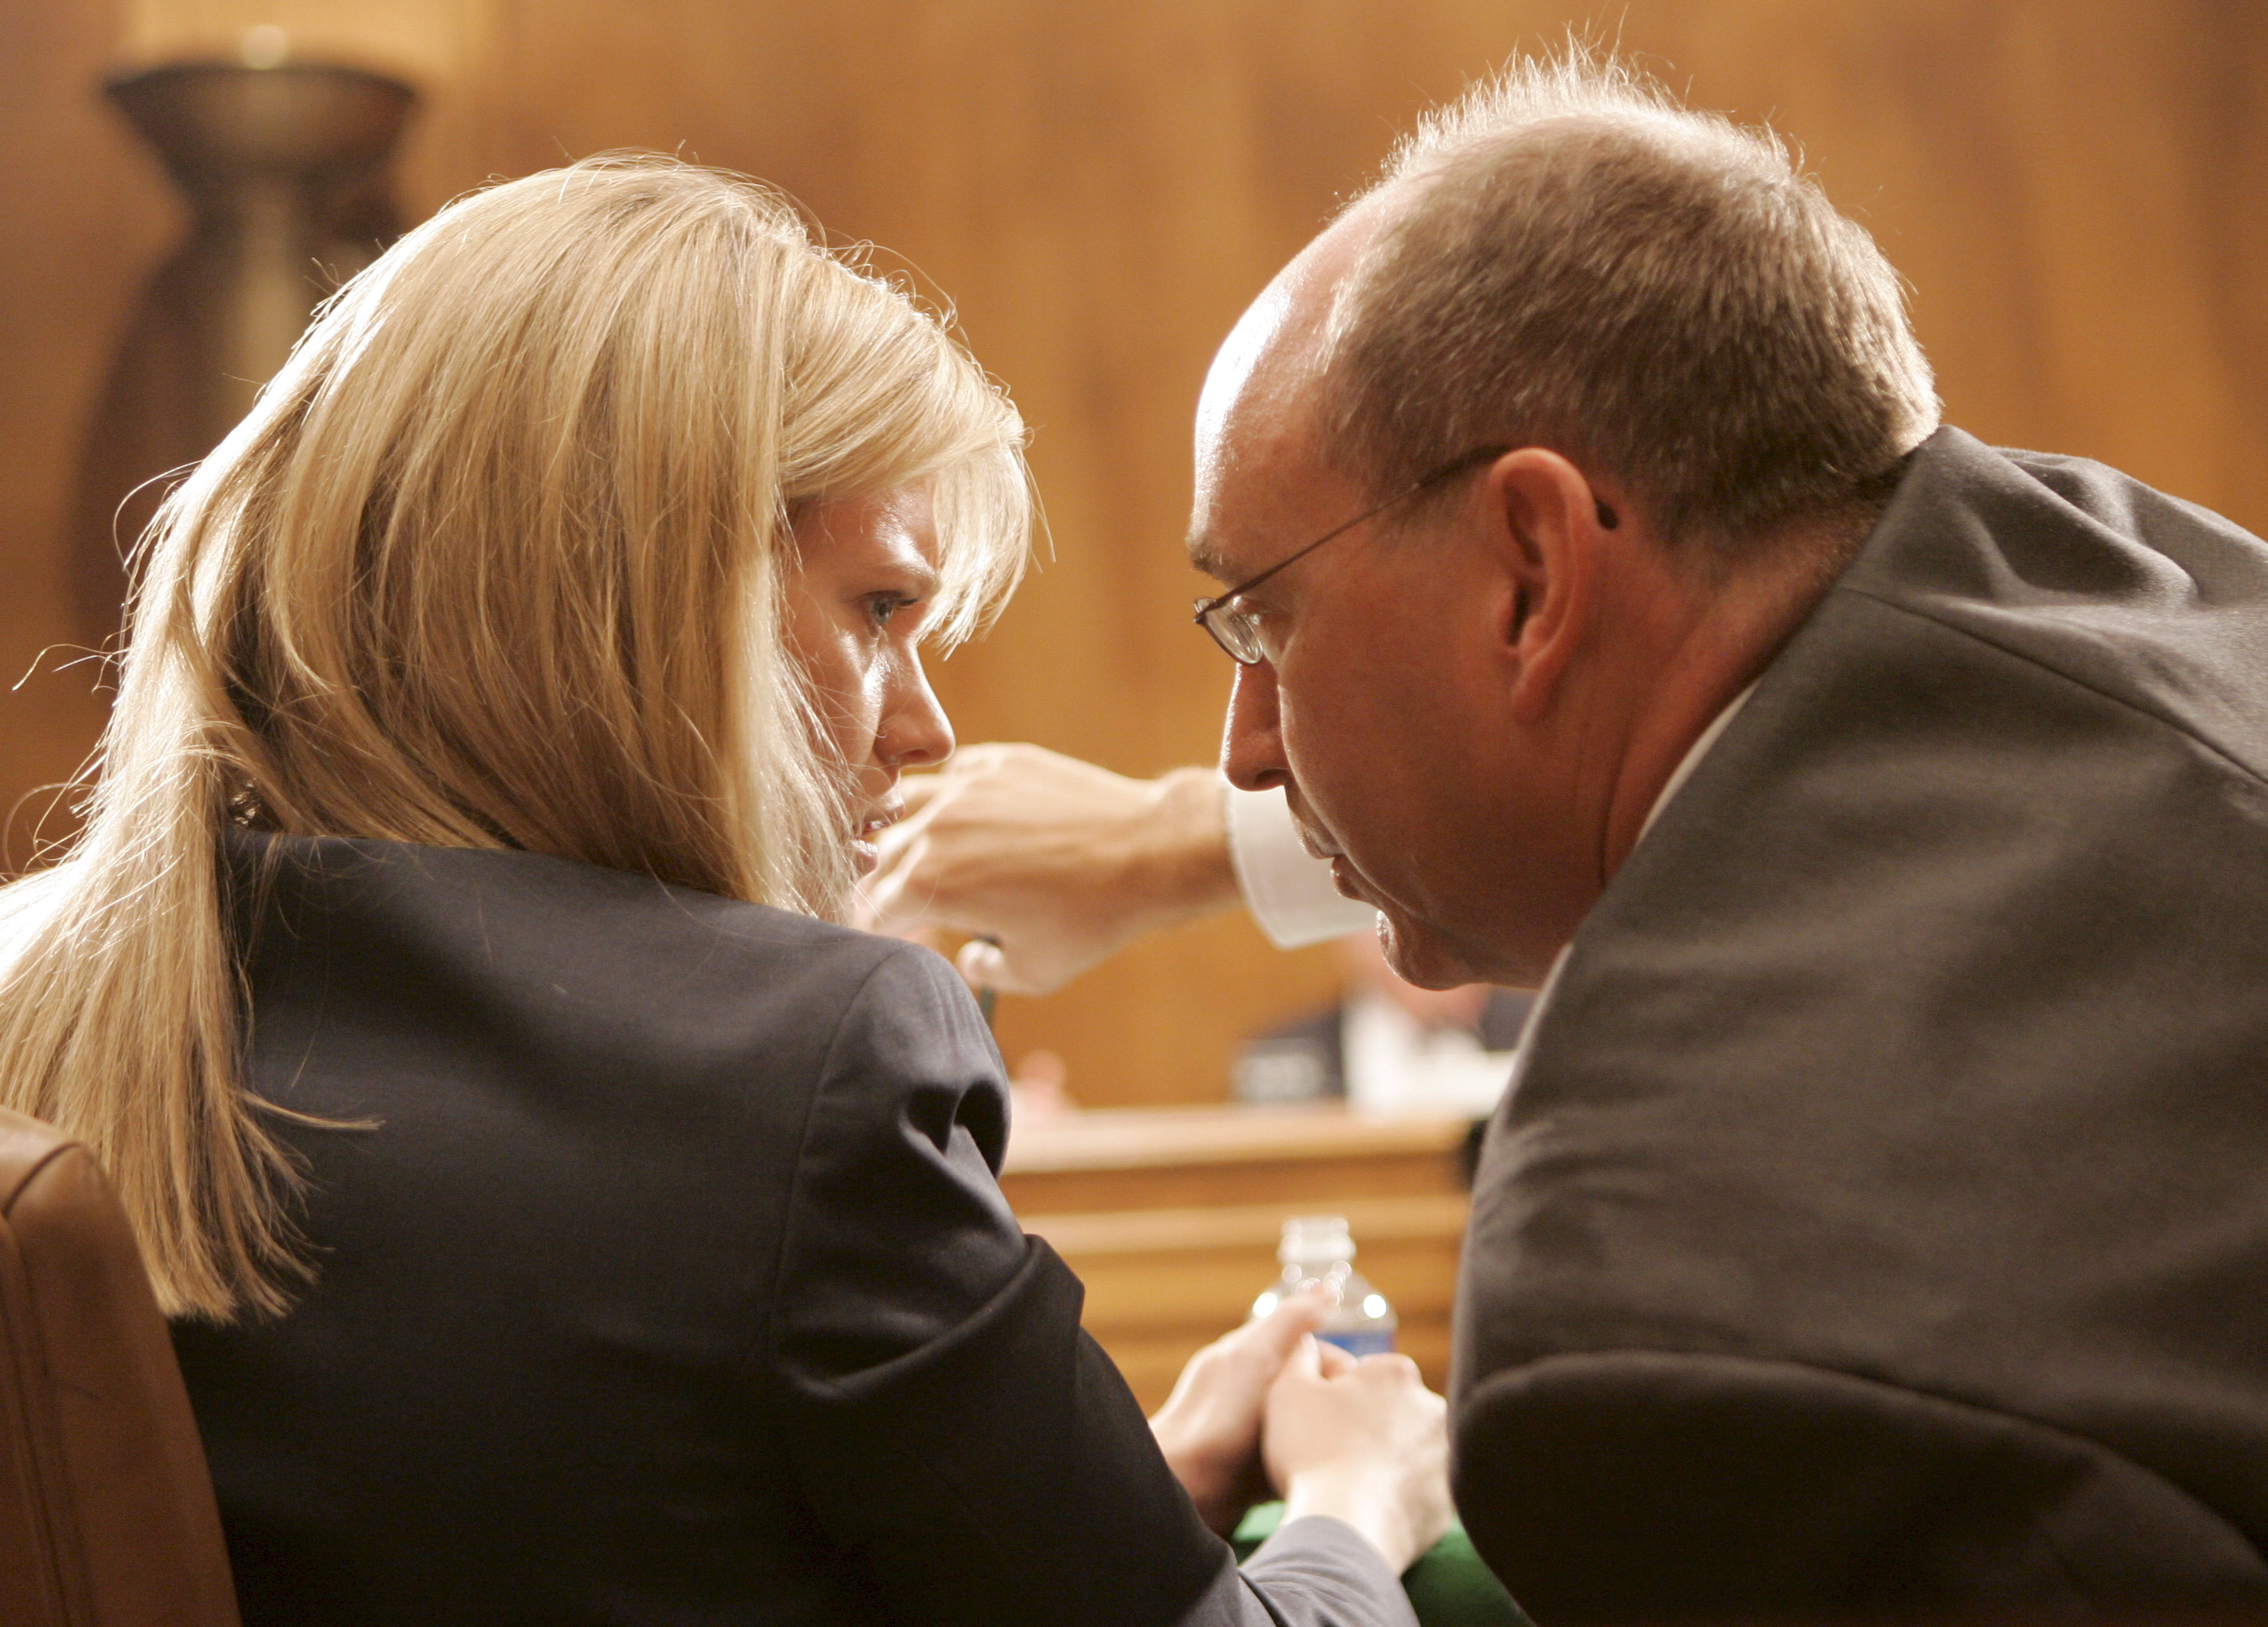 Former White House political director Sara Taylor (R) confers with her attorney Neil Eggleston (L) at a hearing of the US Senate Judiciary Committee on Capitol Hill in Washington, D.C. USA on 11 July 2007. (STEFAN ZAKLIN&mdash;EPA)